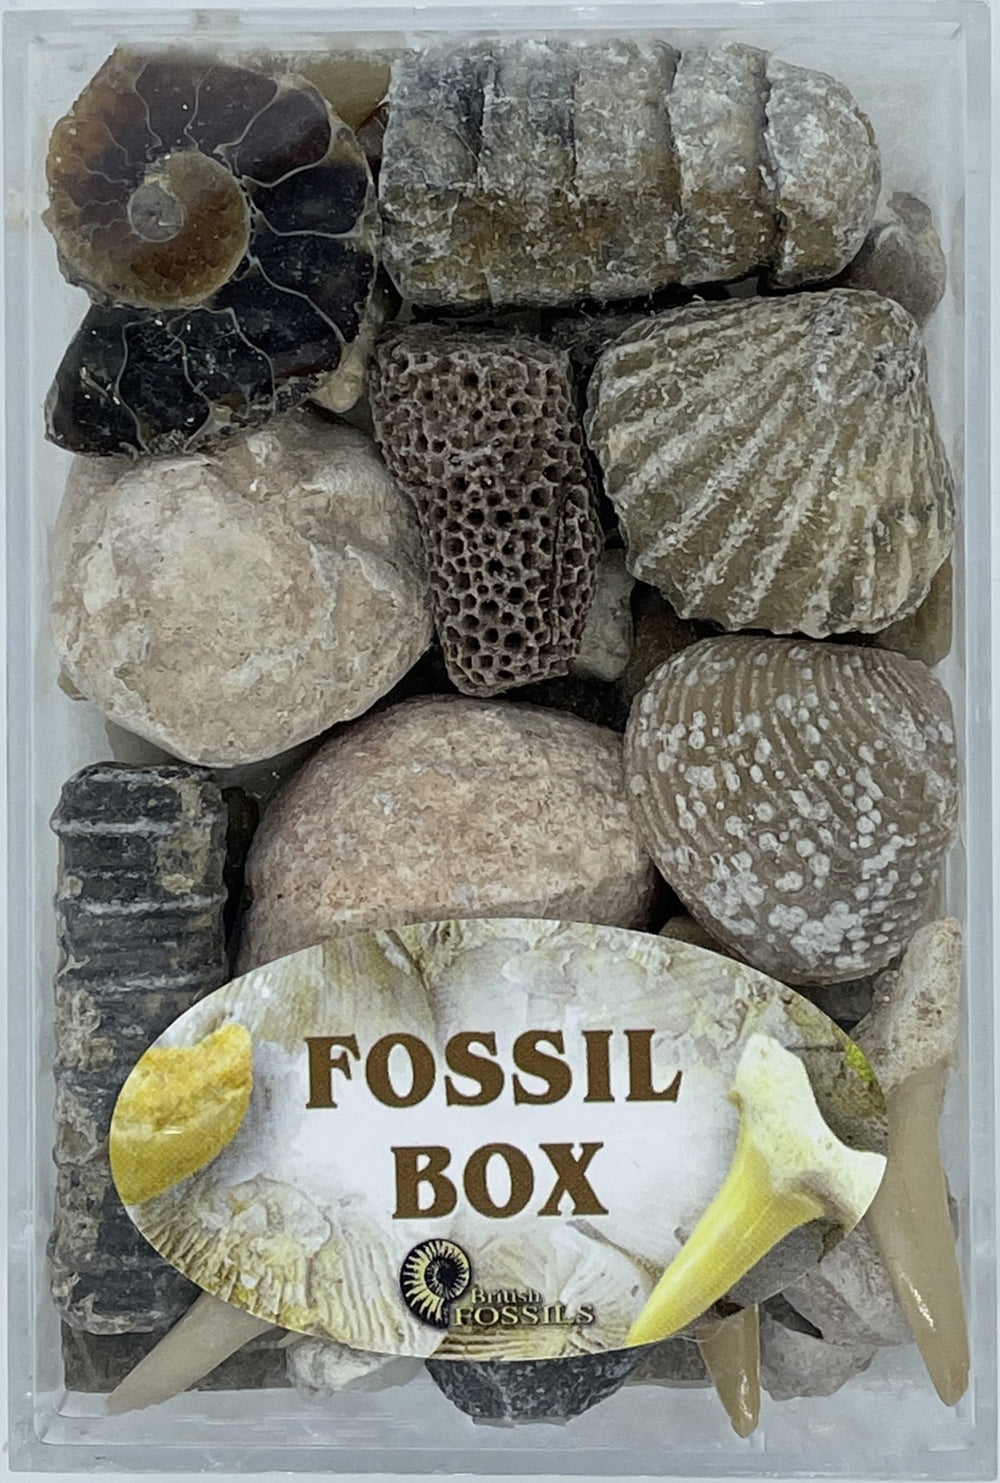 Fossil box shown with clear lid and label on front